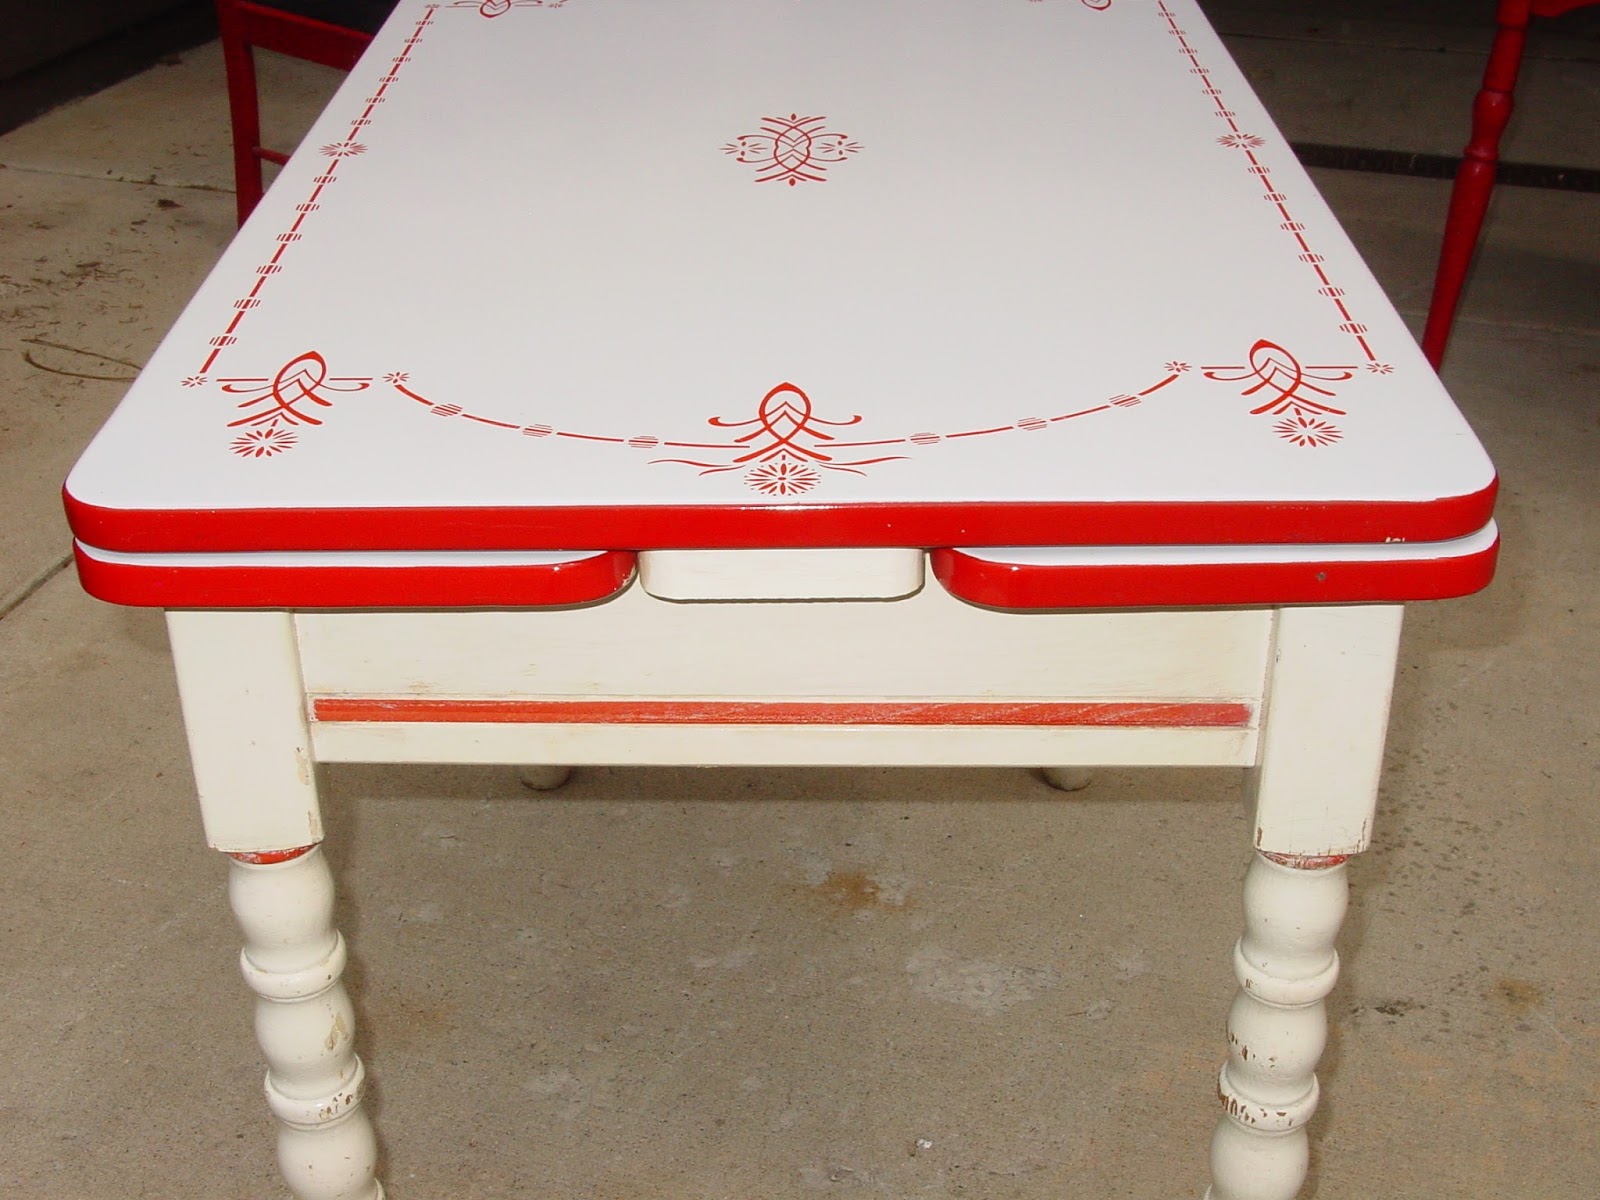 15th 1940s enamel kitchen table white and red